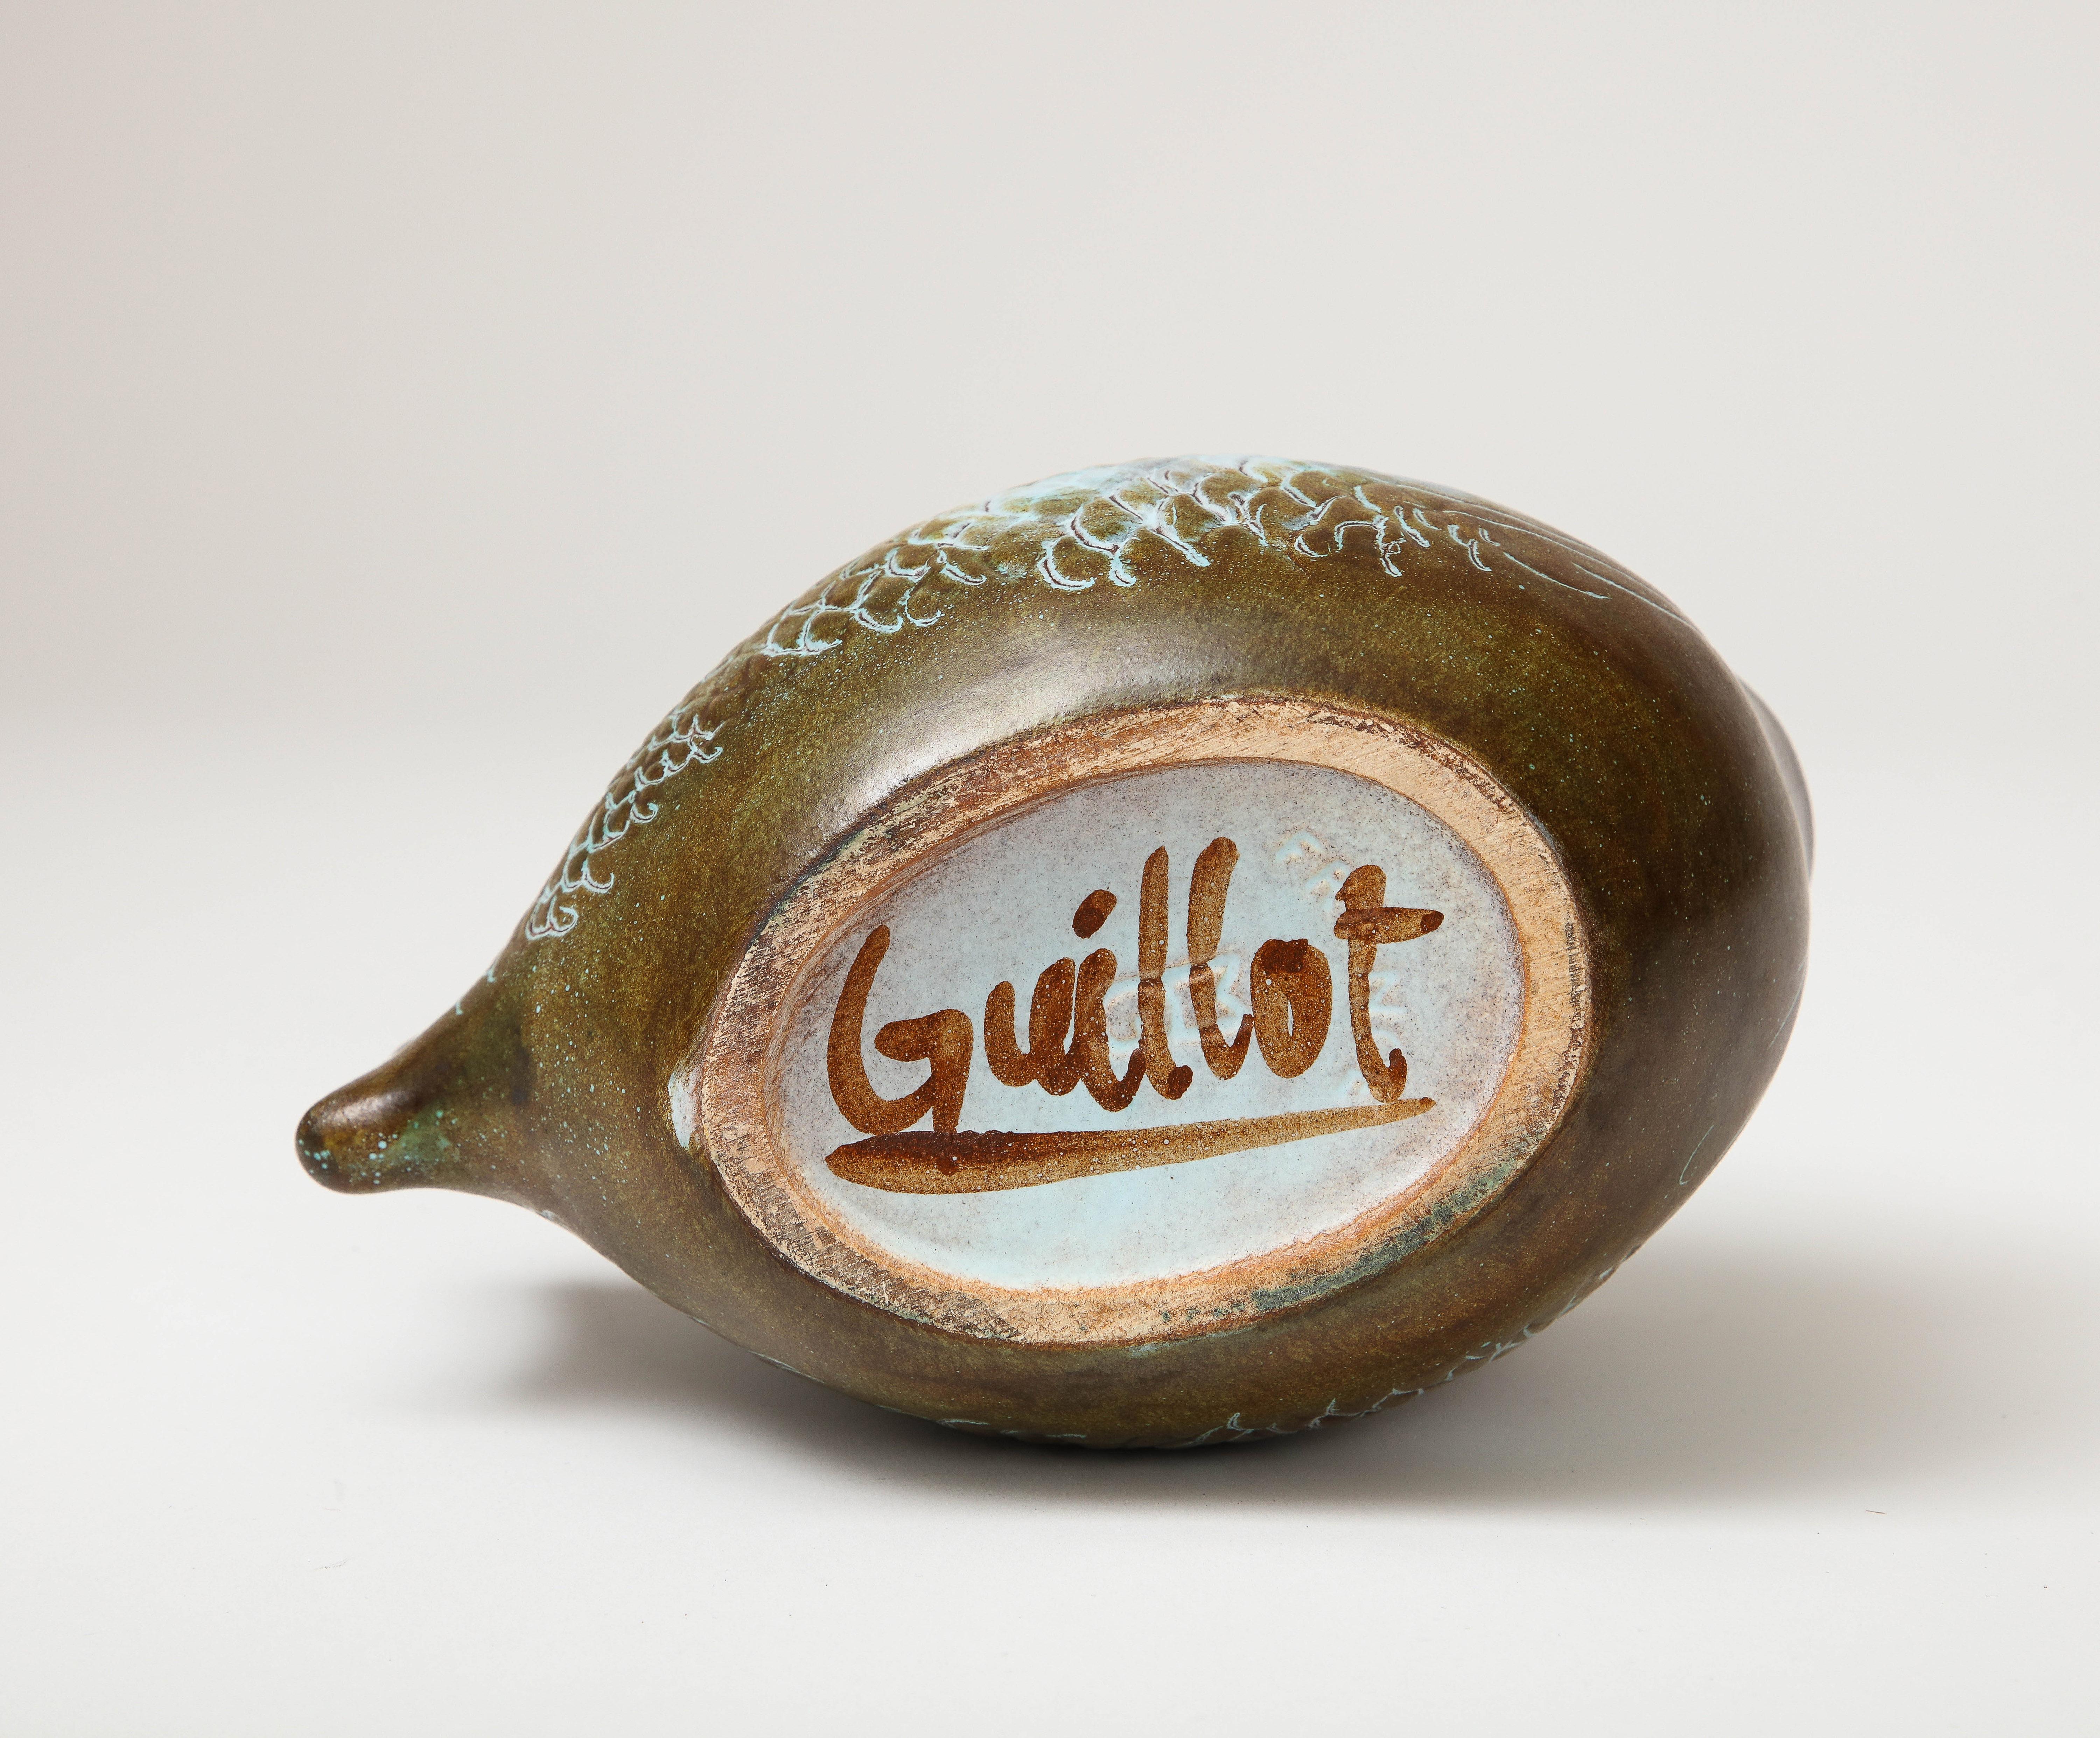 Glazed Ceramic Bowl in the Shape of a Fish, Guillot, c. 1960 For Sale 4